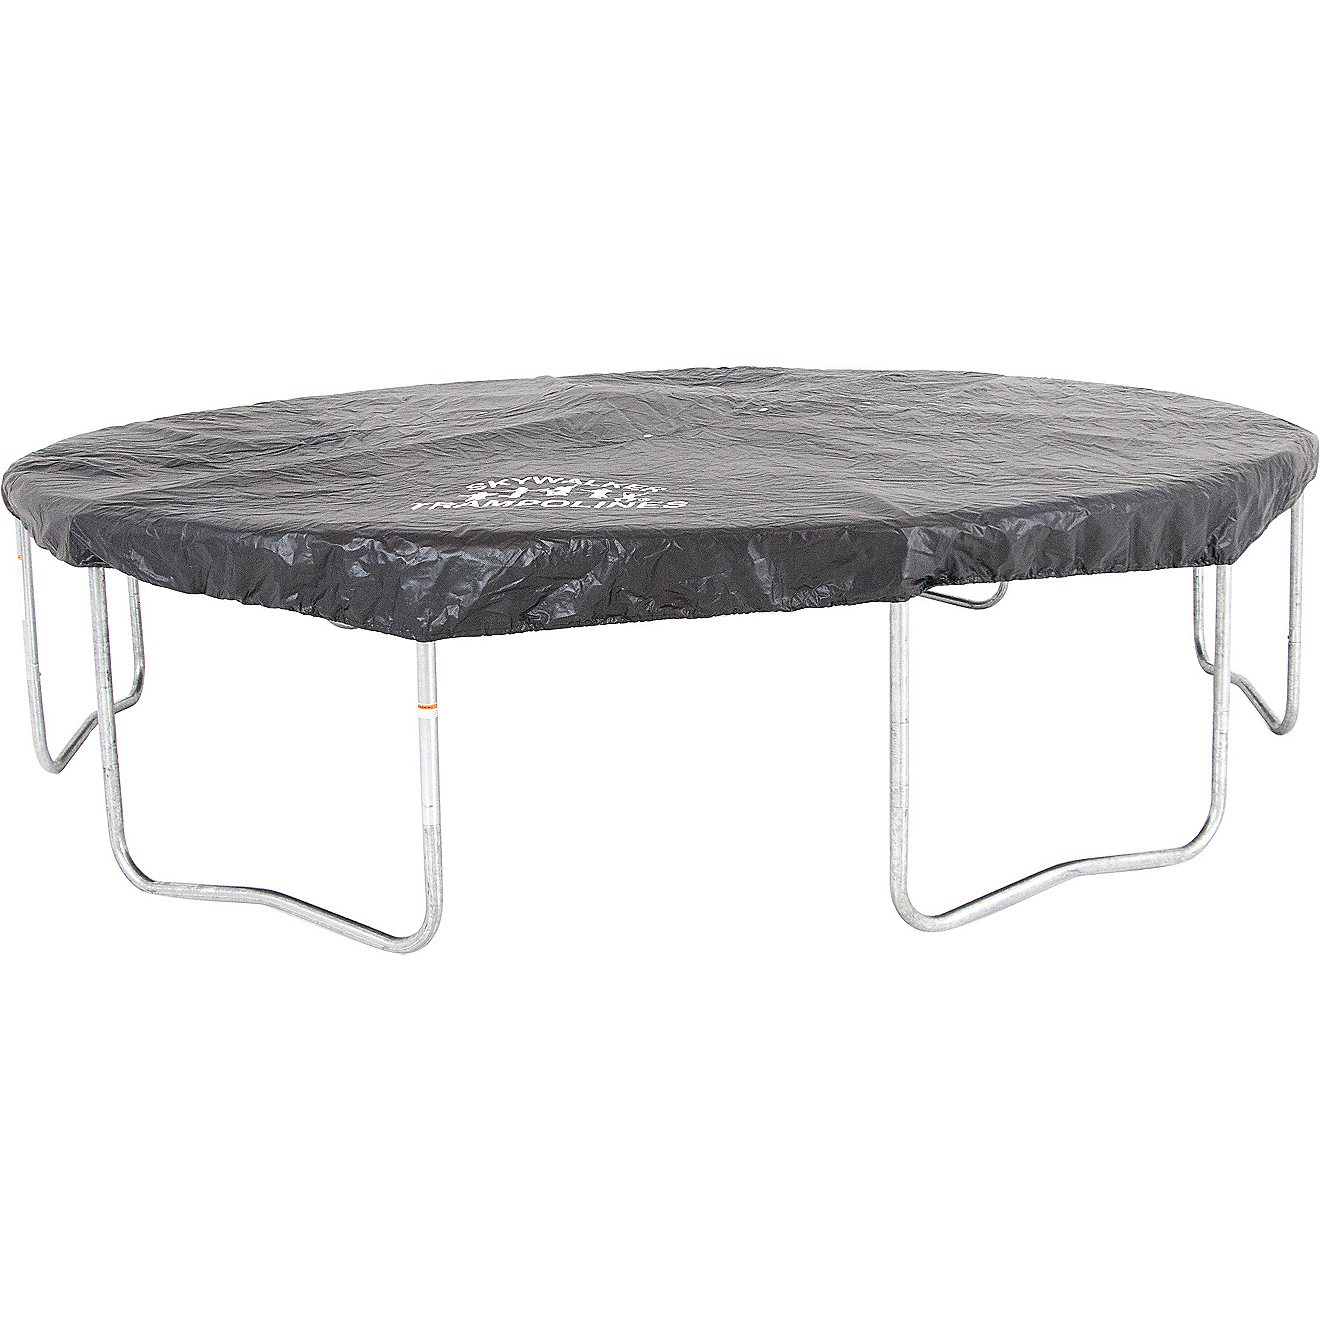 Skywalker Trampolines 12 ft Round PVC Weather Cover                                                                              - view number 1